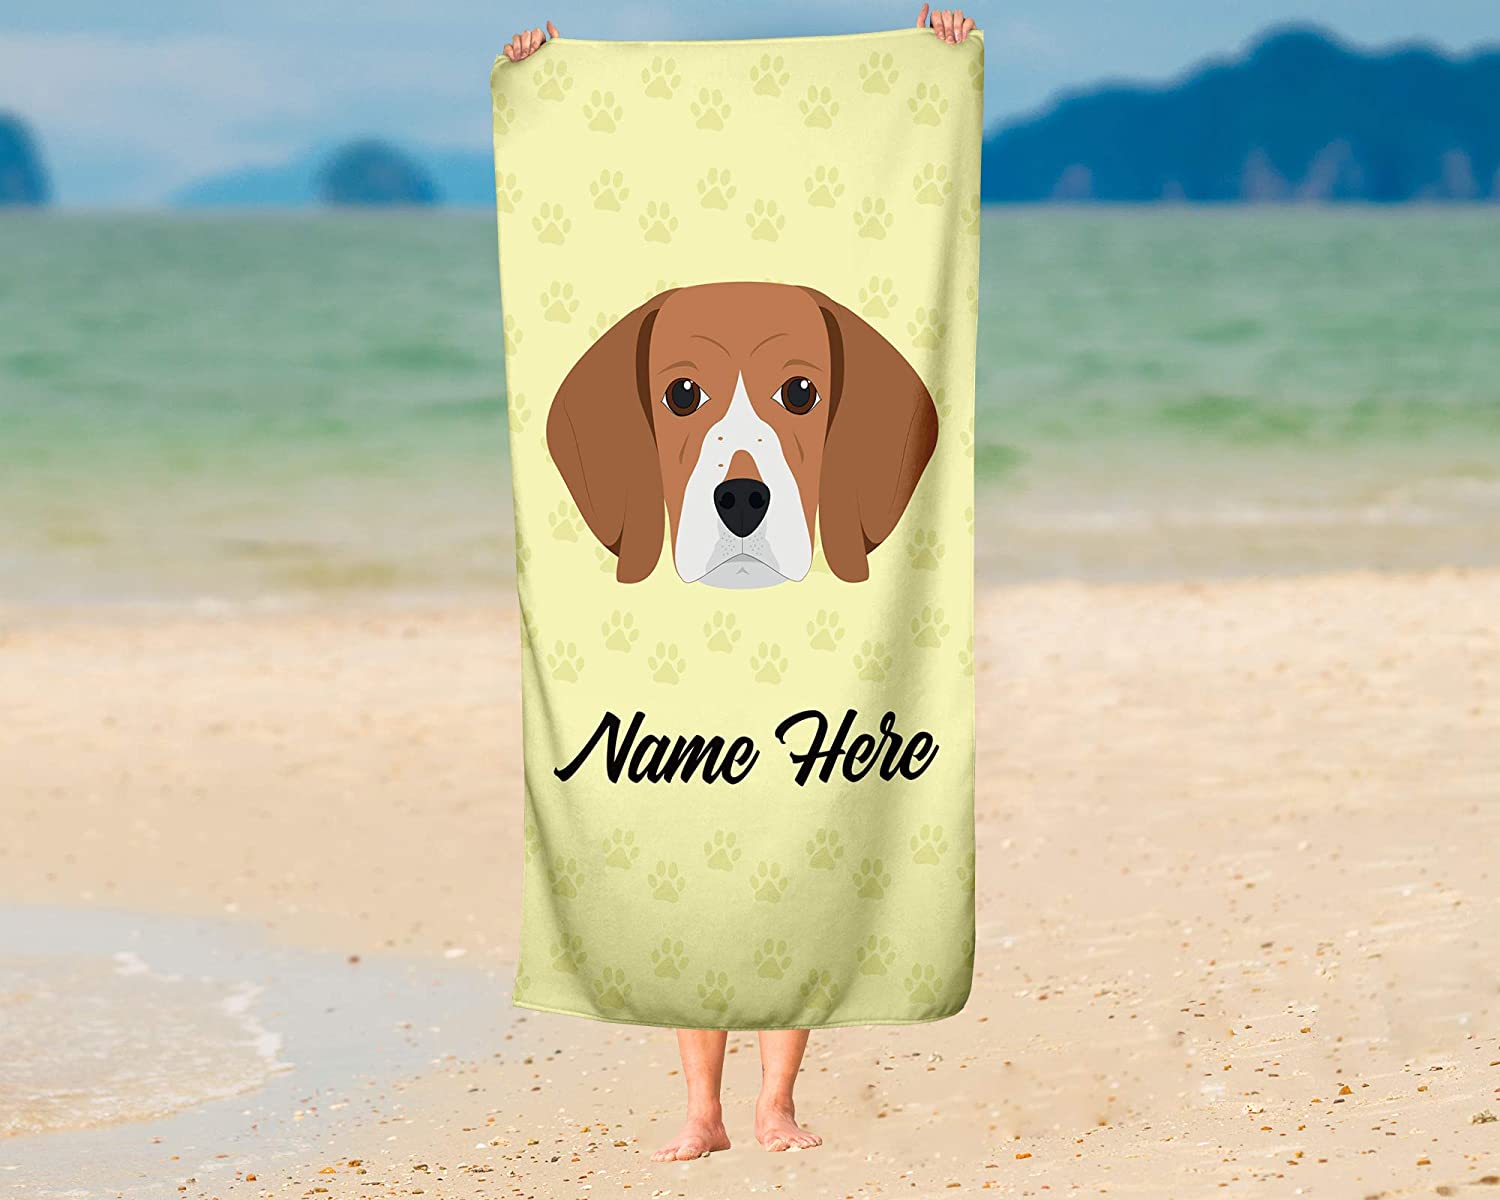 Personalized Corner Custom Beagle Beach Towels - Extra Large Adults Childrens Towel for Outdoor Boy Girl Fun Pool Bath Kid Baby Toddler Boys Girls …